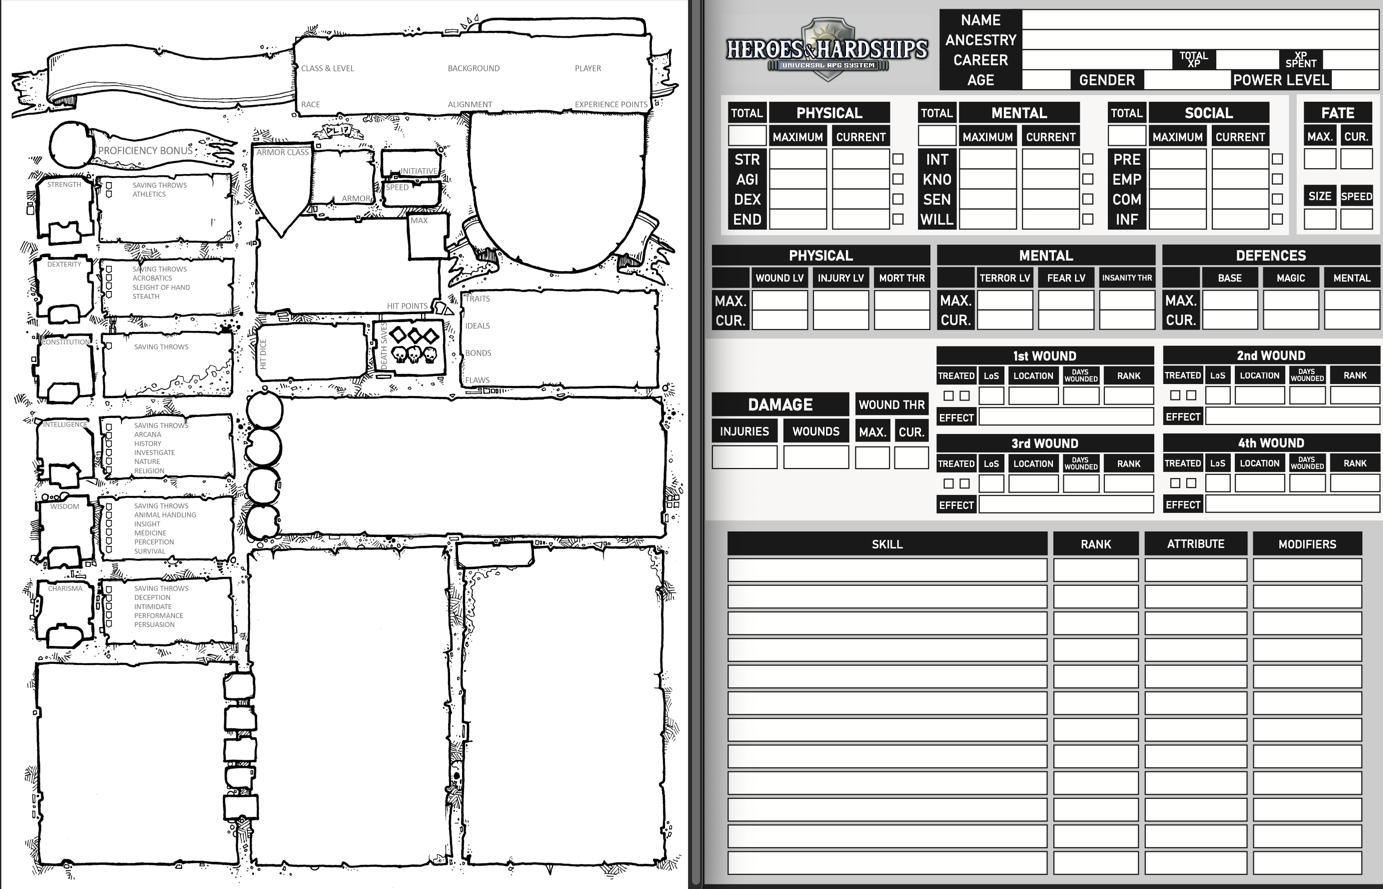 A side-by-side comparison of one of Dyson Logos's hand-drawn 5E character sheets and the official Heroes & Hardships character sheet. The former is infused with tons of character and visual hints about the type of game this is. The latter looks like a spreadsheet.